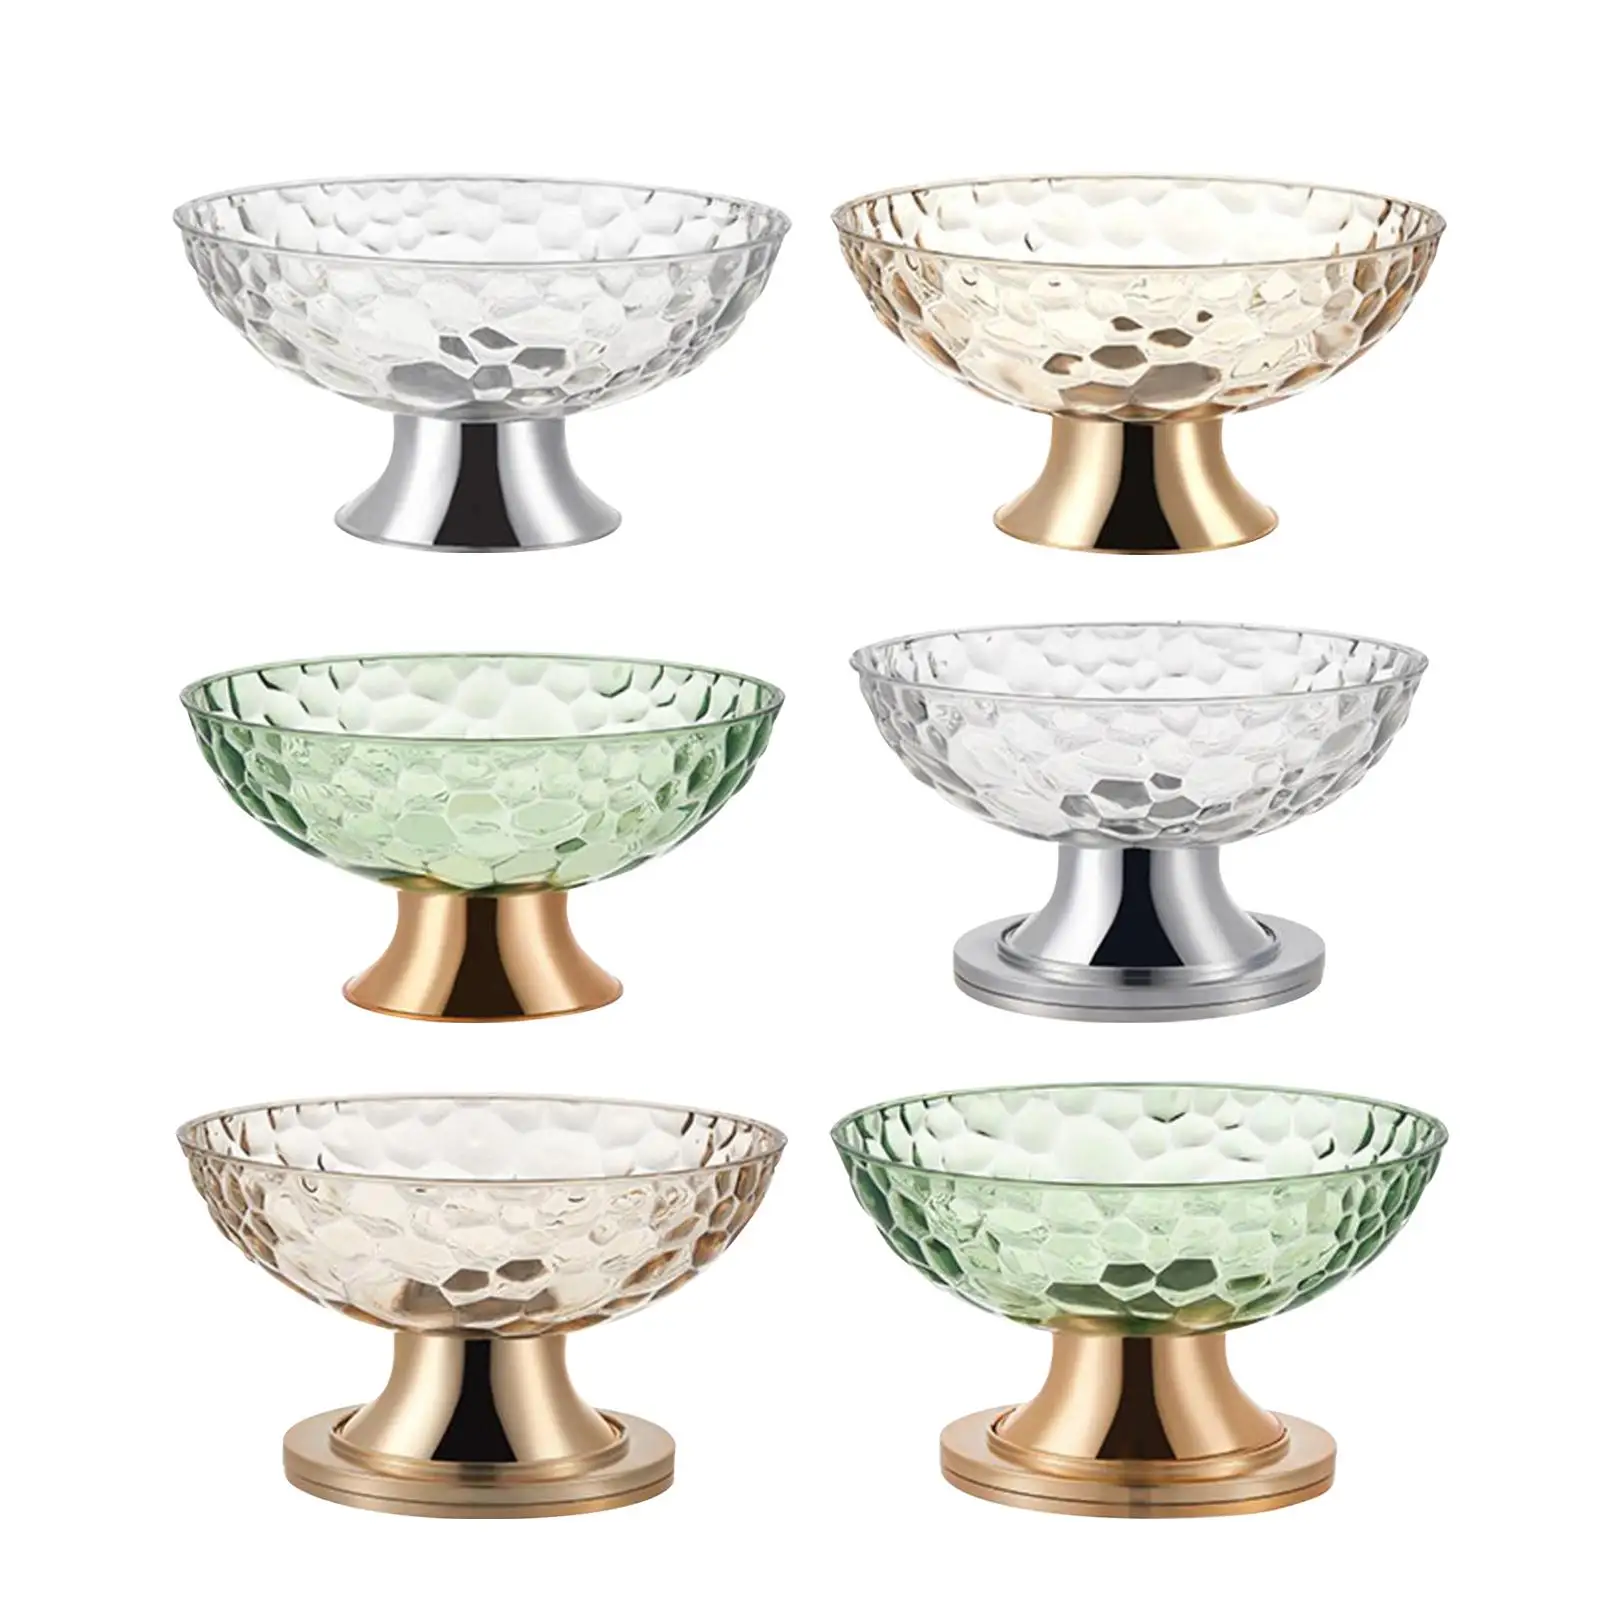 Decorative Pedestal Bowl,Vegetable Food Tray,Dessert Display Stand,Fruit Dish Plate for Dining Room Tables Breads Snacks Home